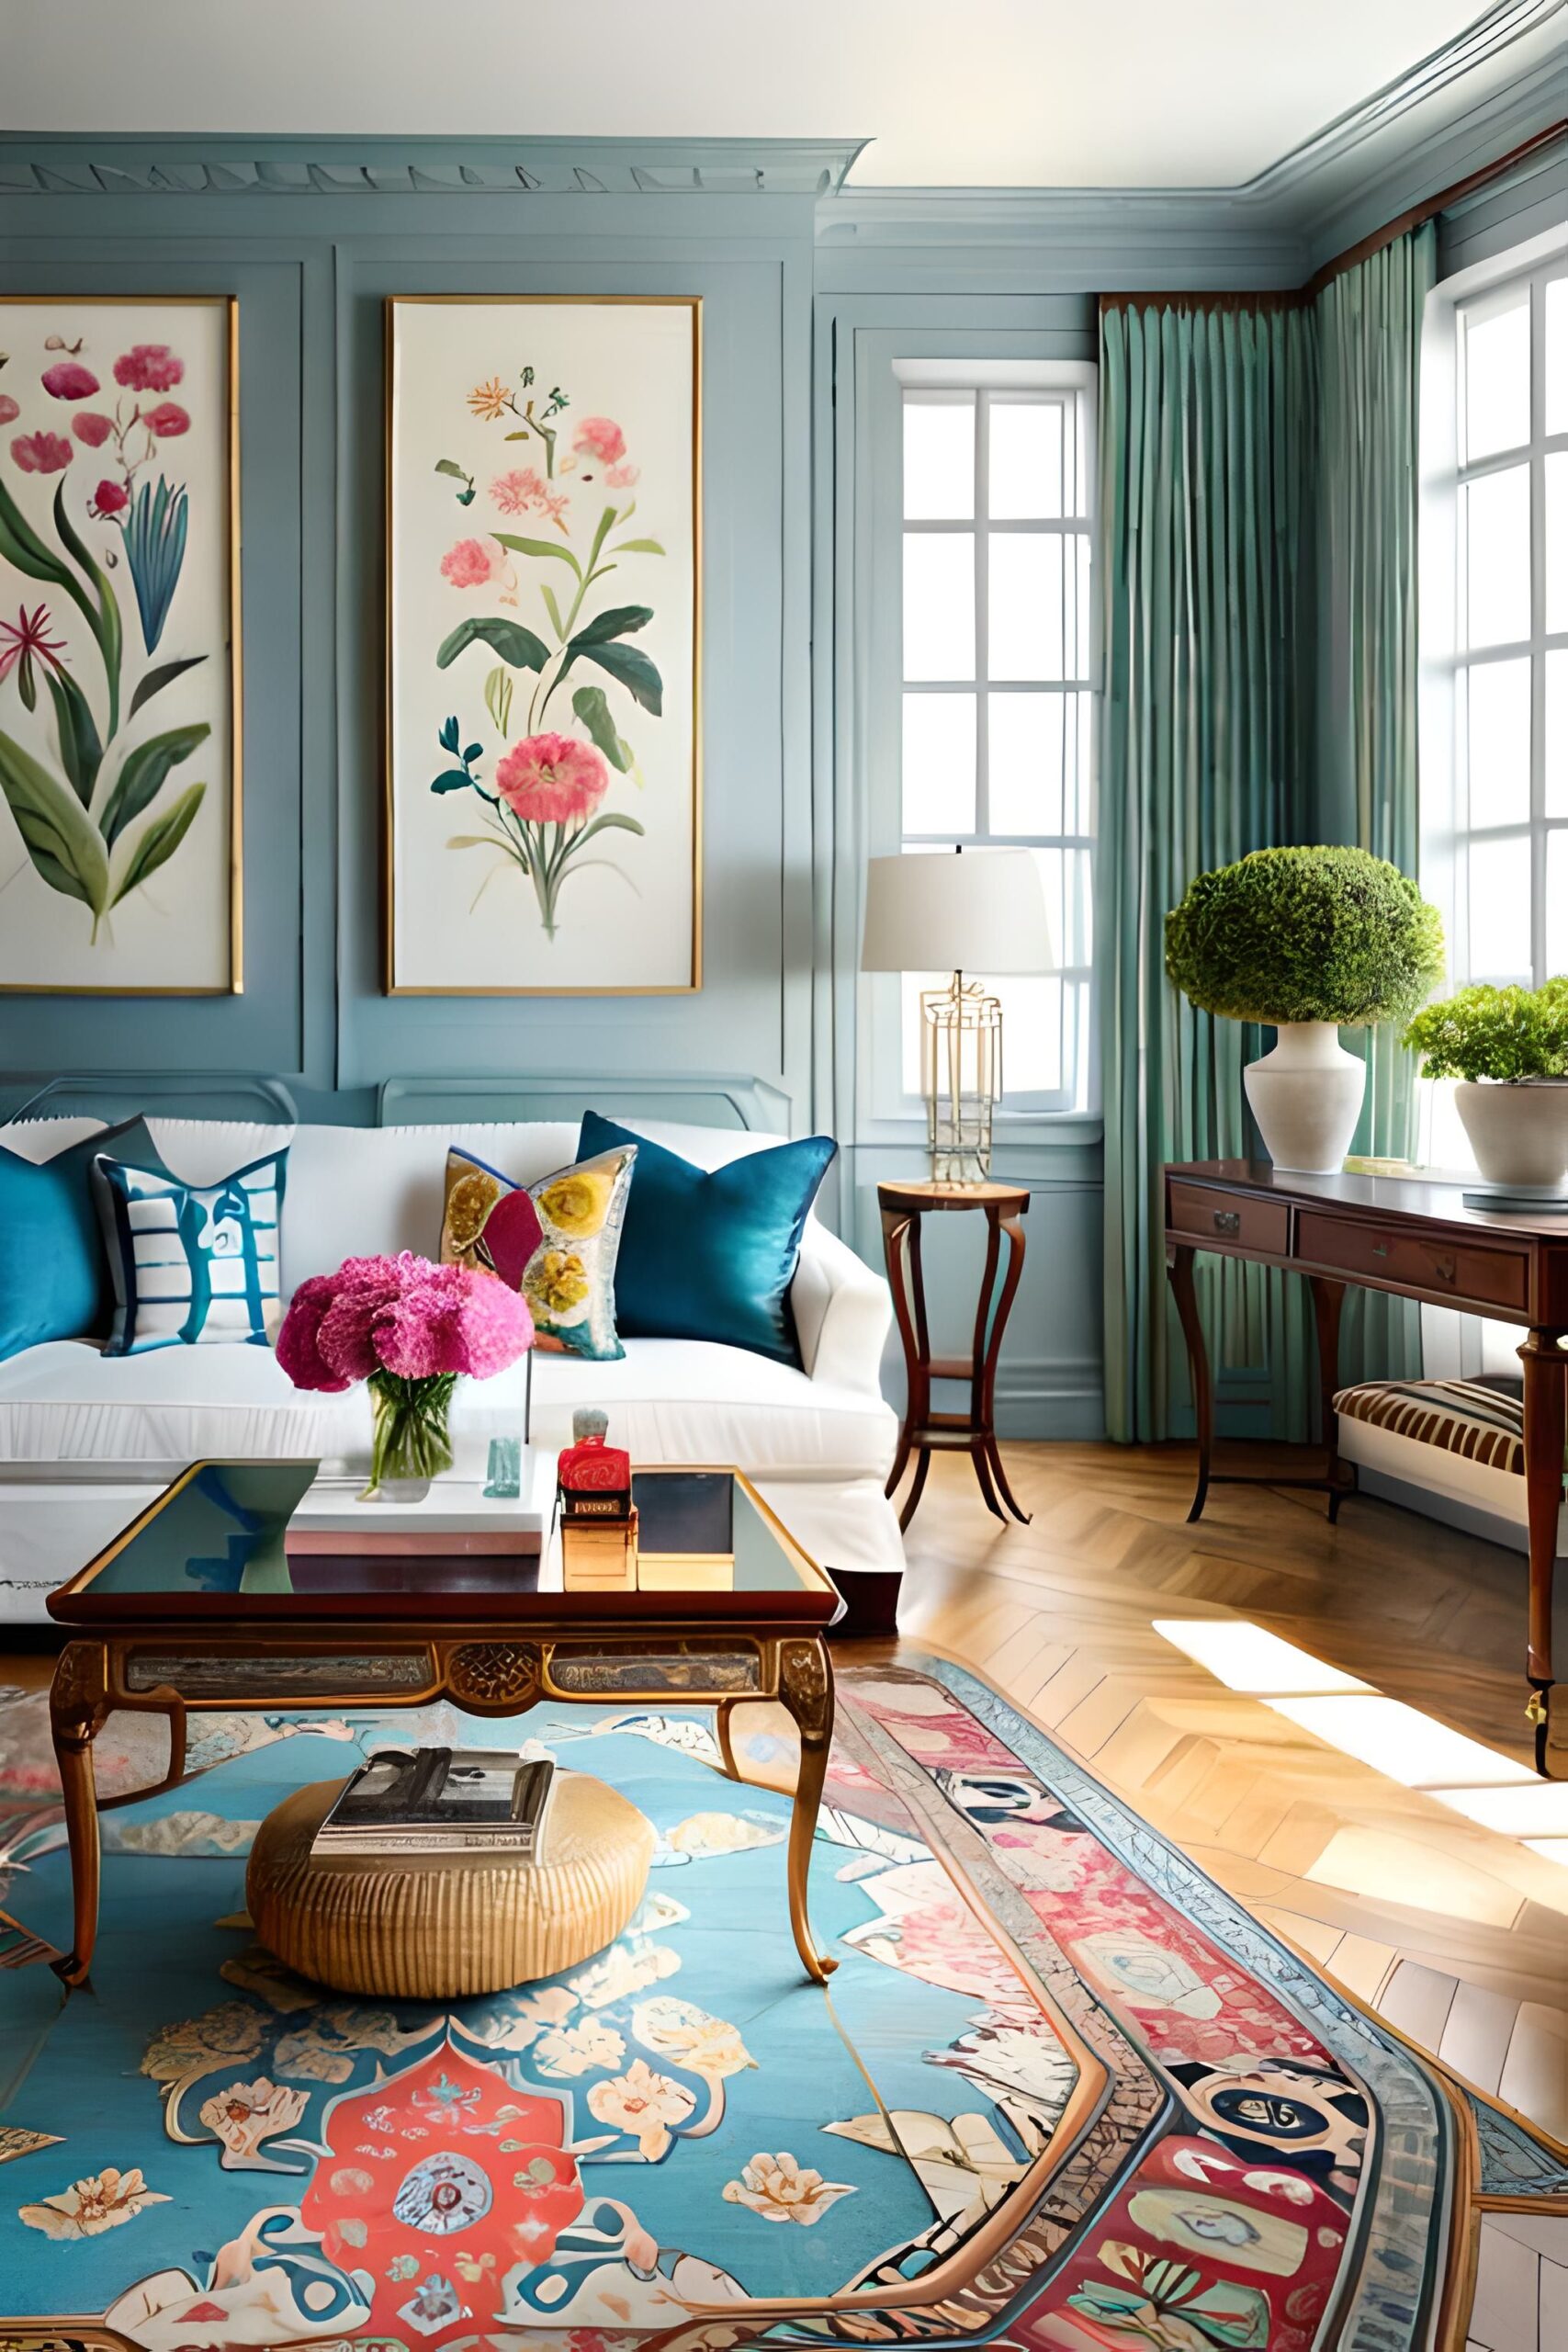 Creating an Elegant Living Room: Tips and
Tricks for a Luxurious Space